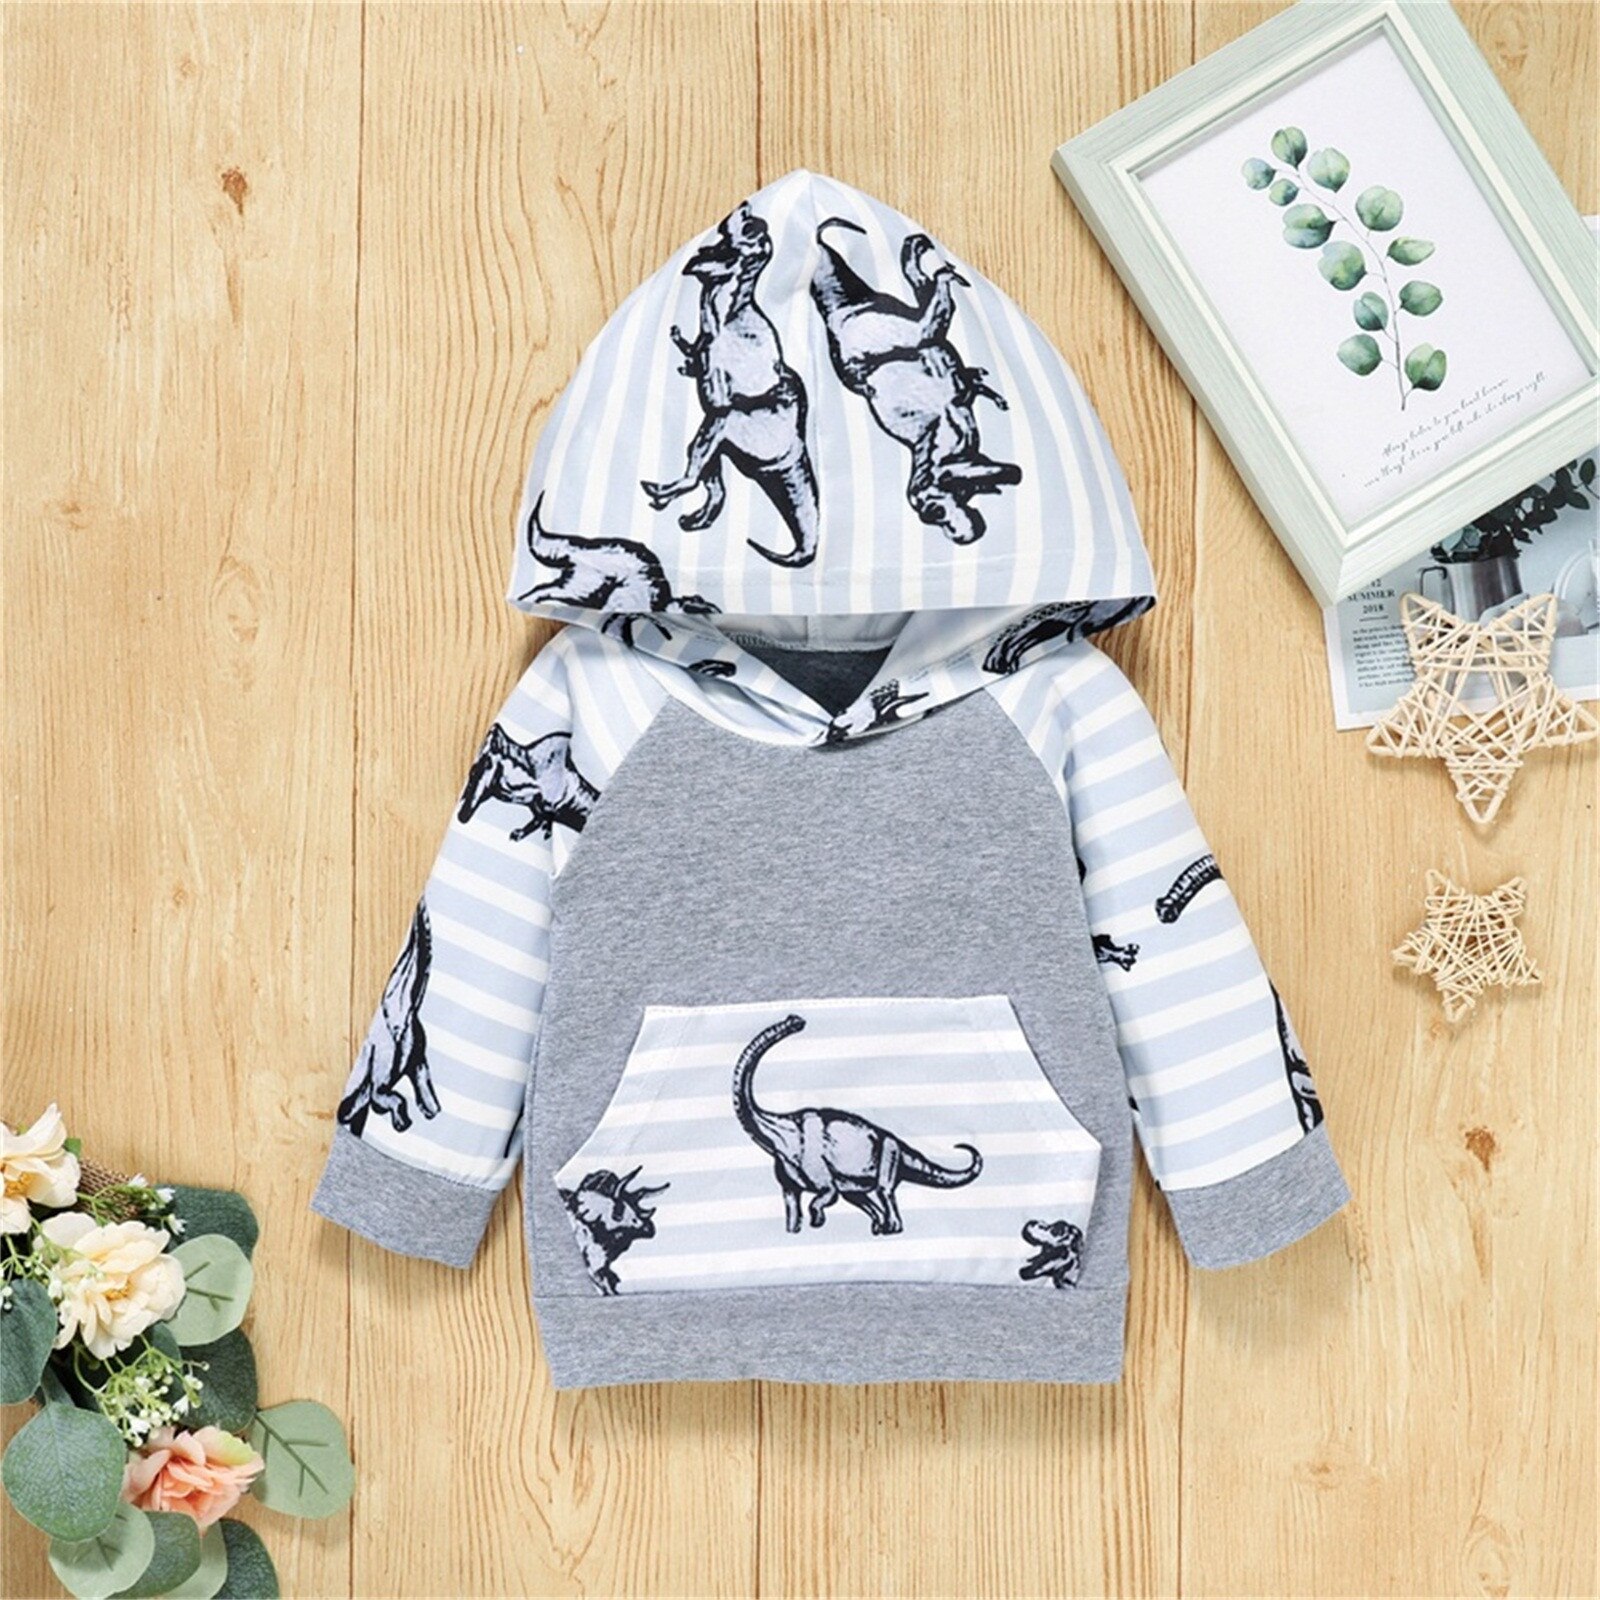 Newborn-Baby-Boy-Clothing-Sets-Baby-Winter-Outfits-Dinosaur-Print-Hooded-Sweater-Pants-Tracksuit-Child-Boy-2